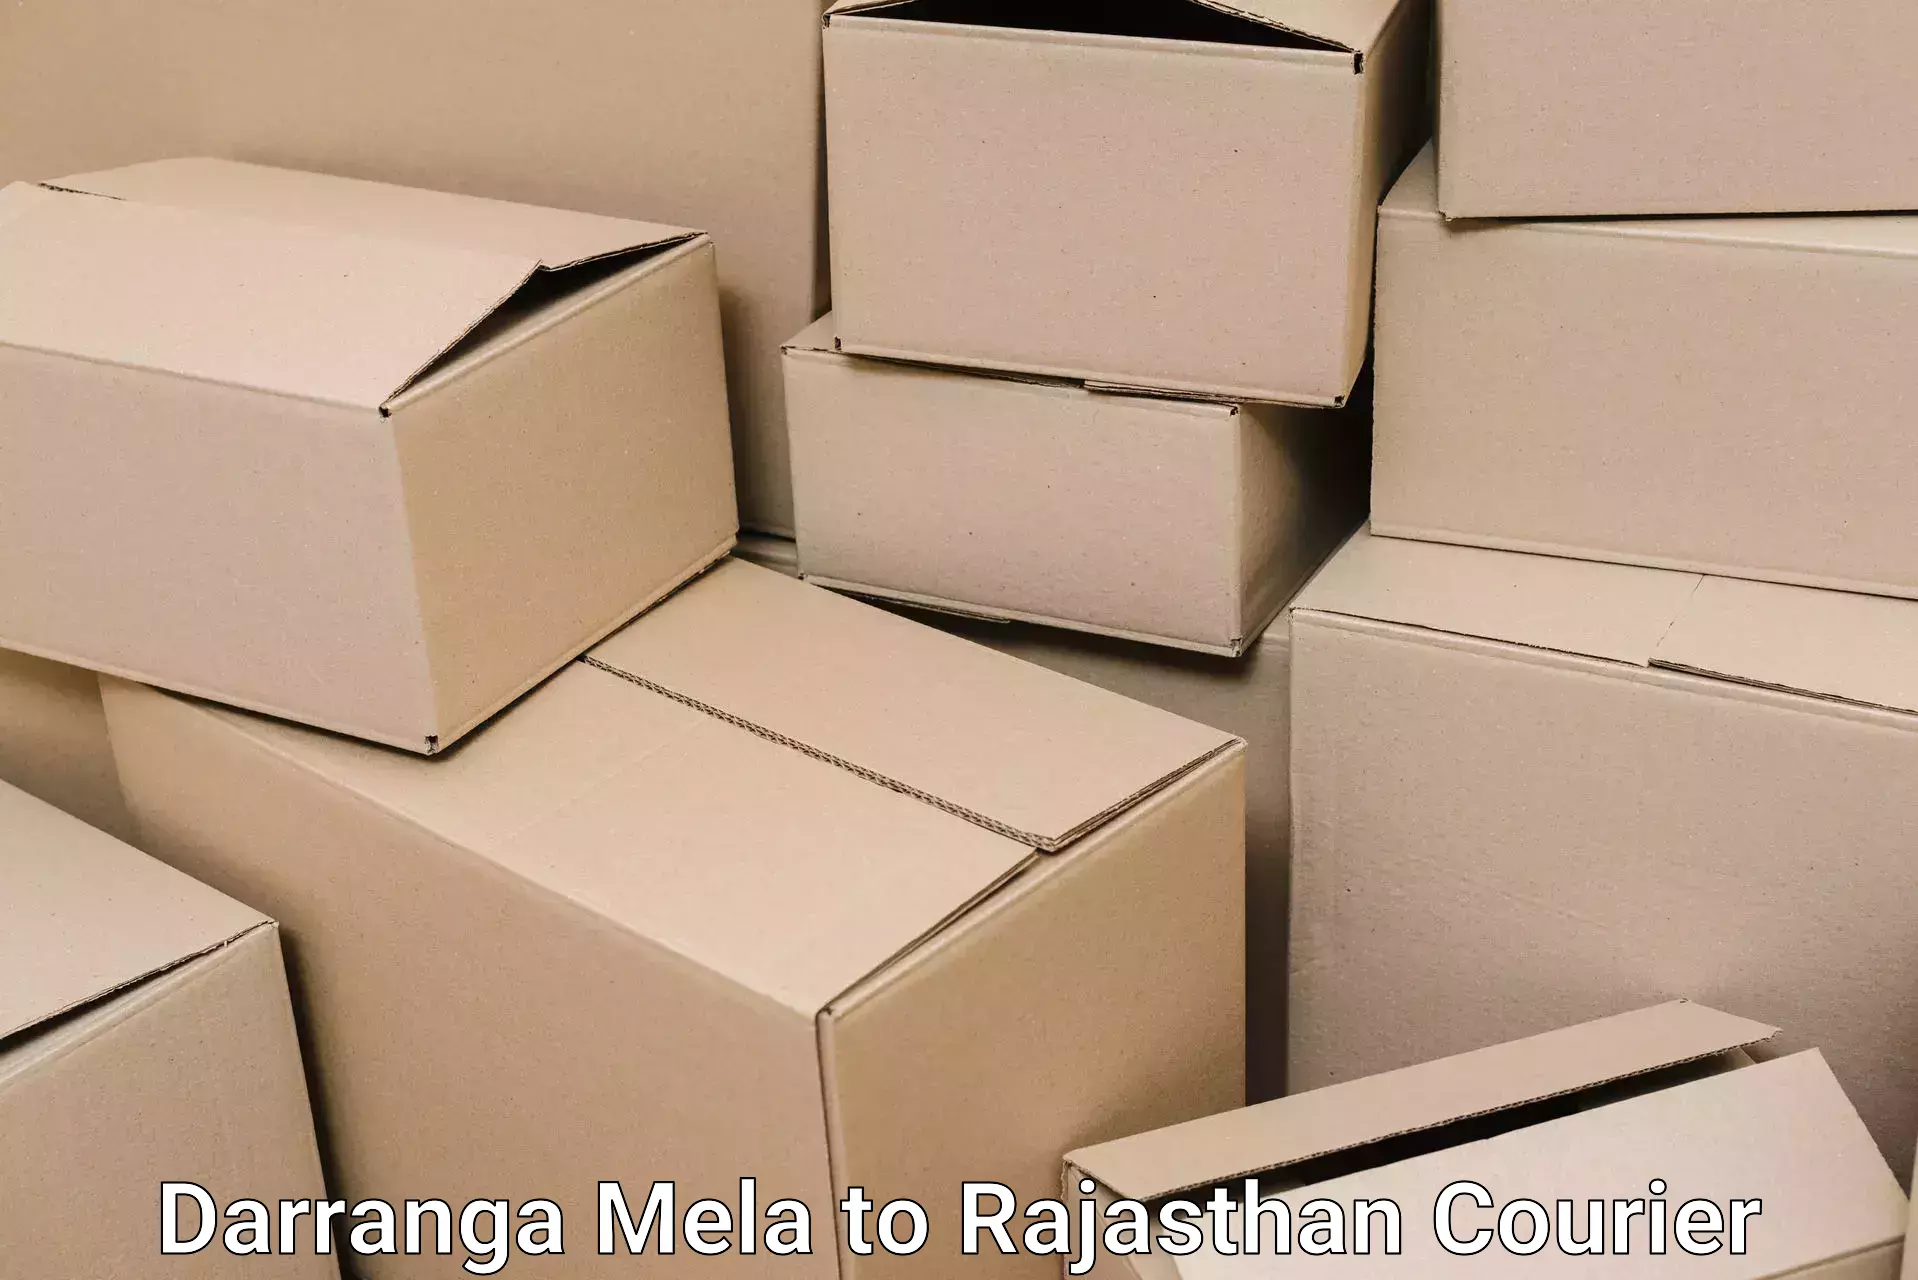 Full home relocation services in Darranga Mela to Rajasthan